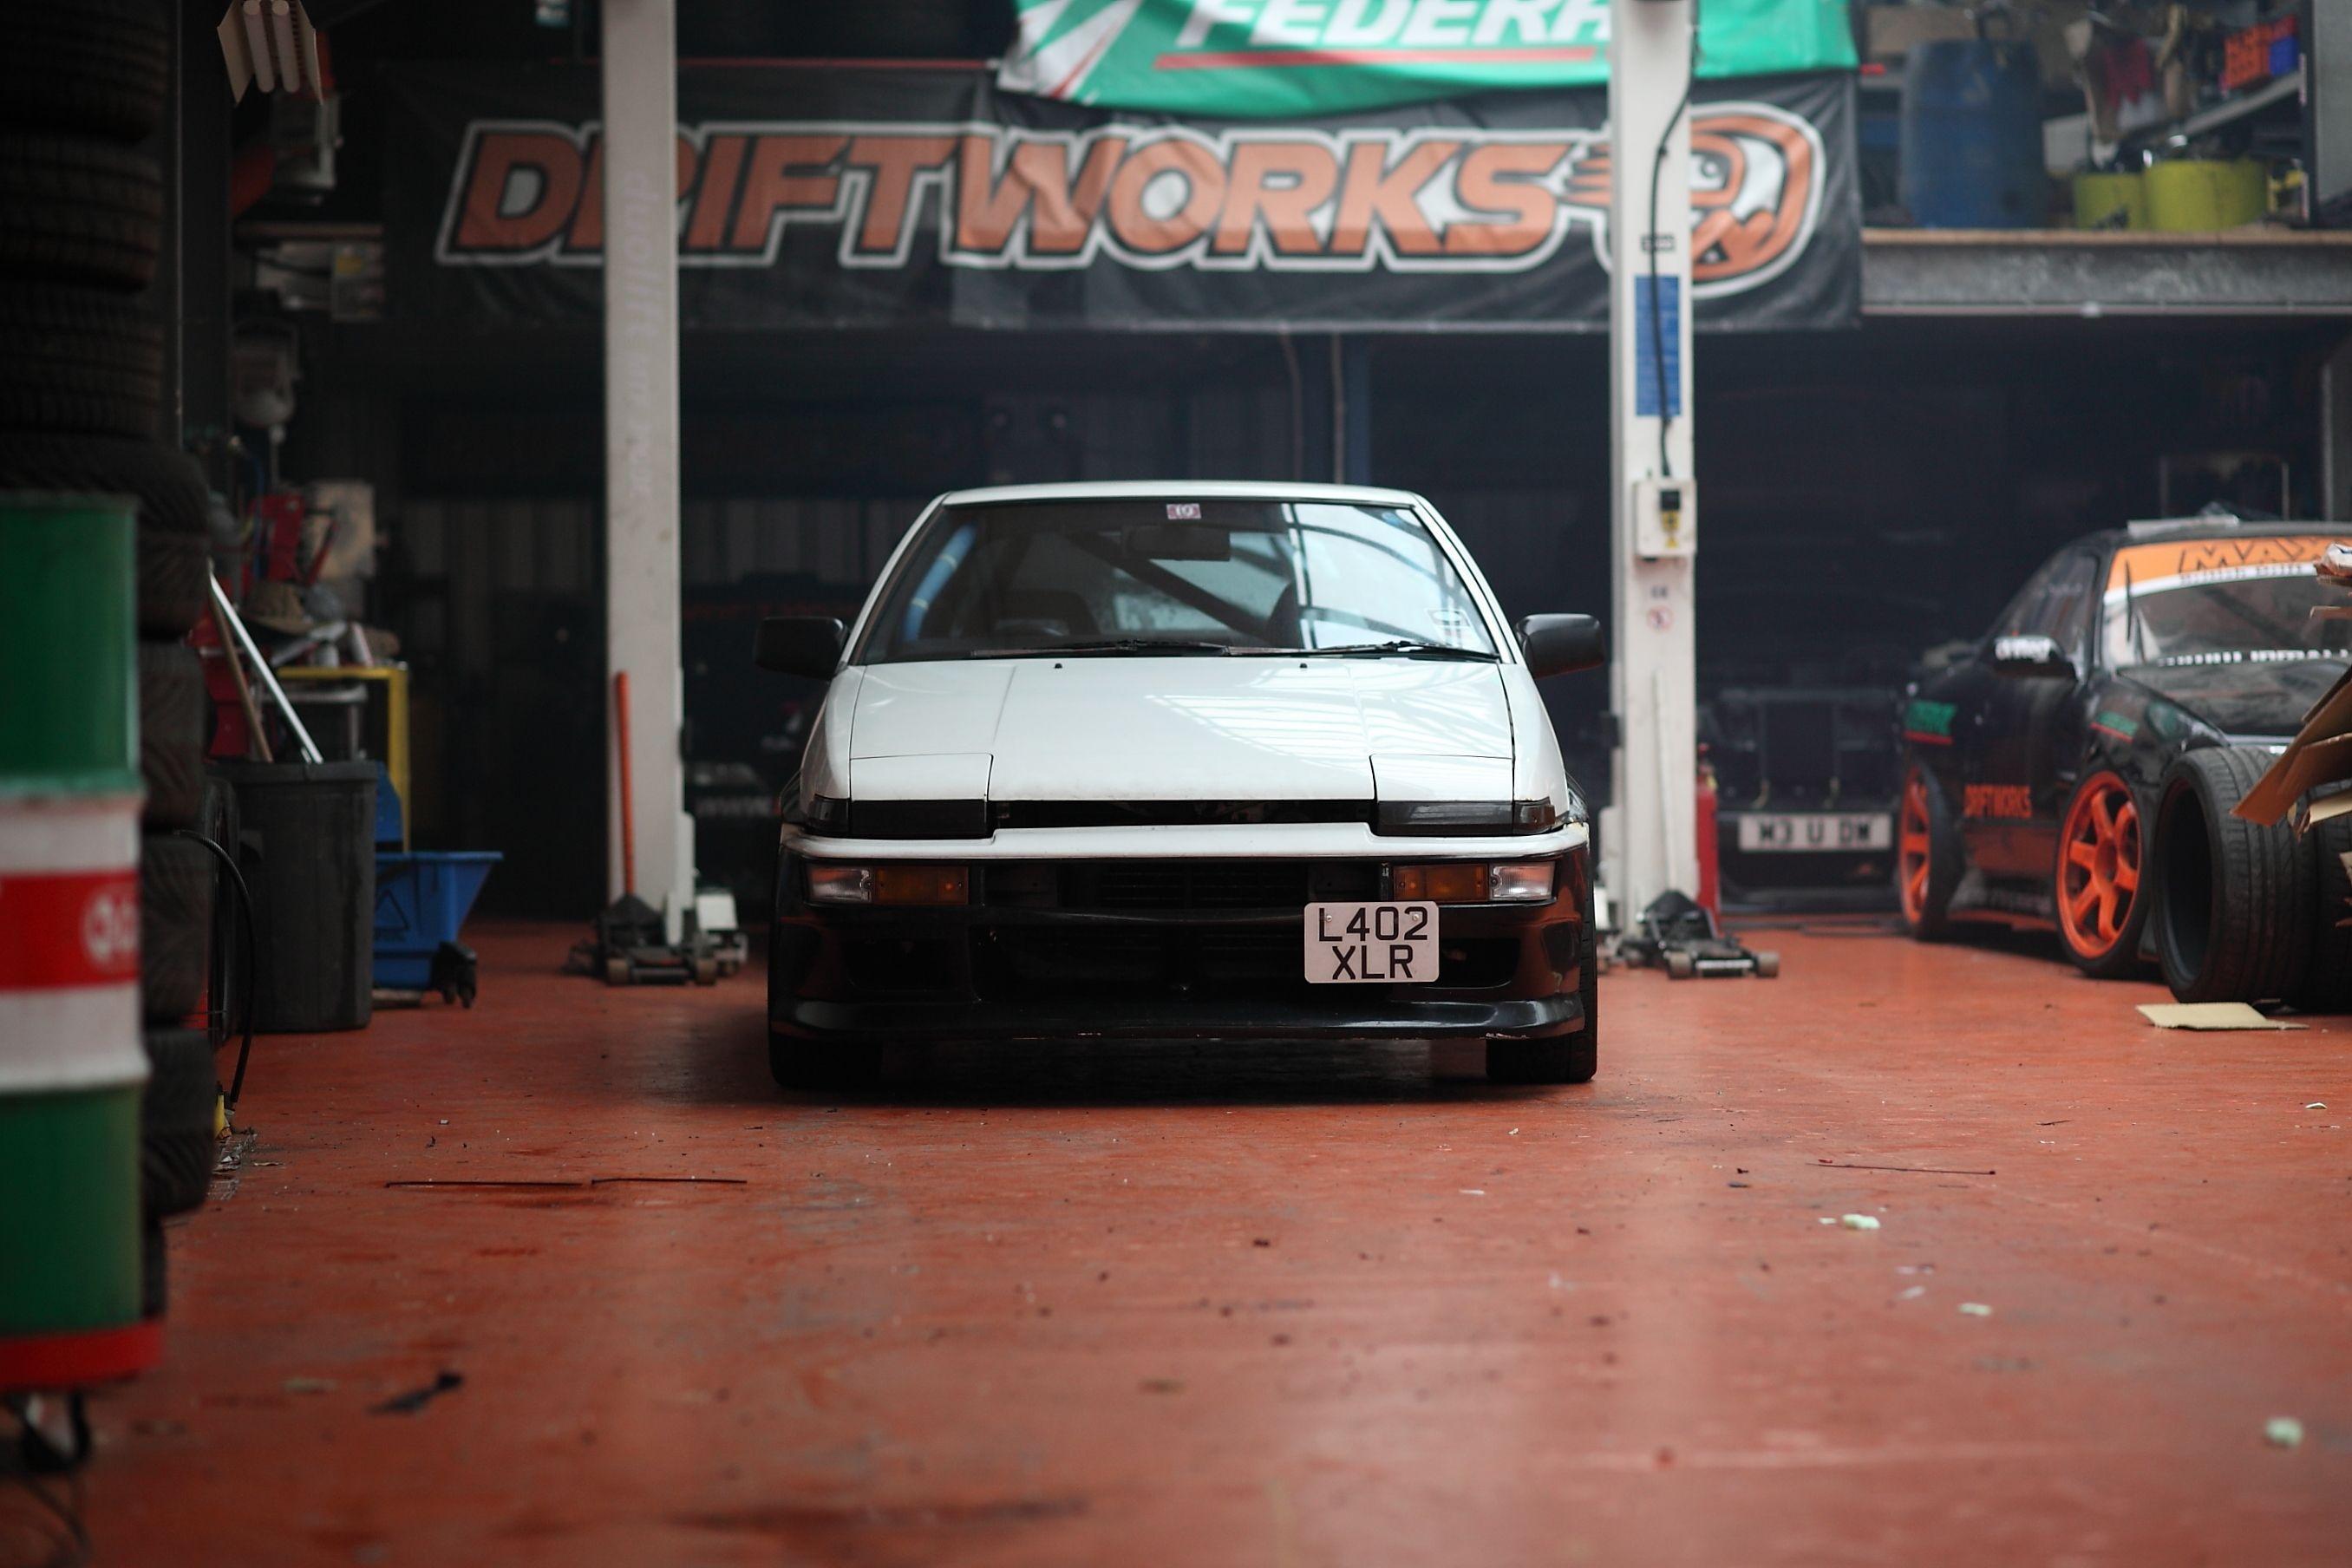 Wallpaper for Sunday: AE86 waiting